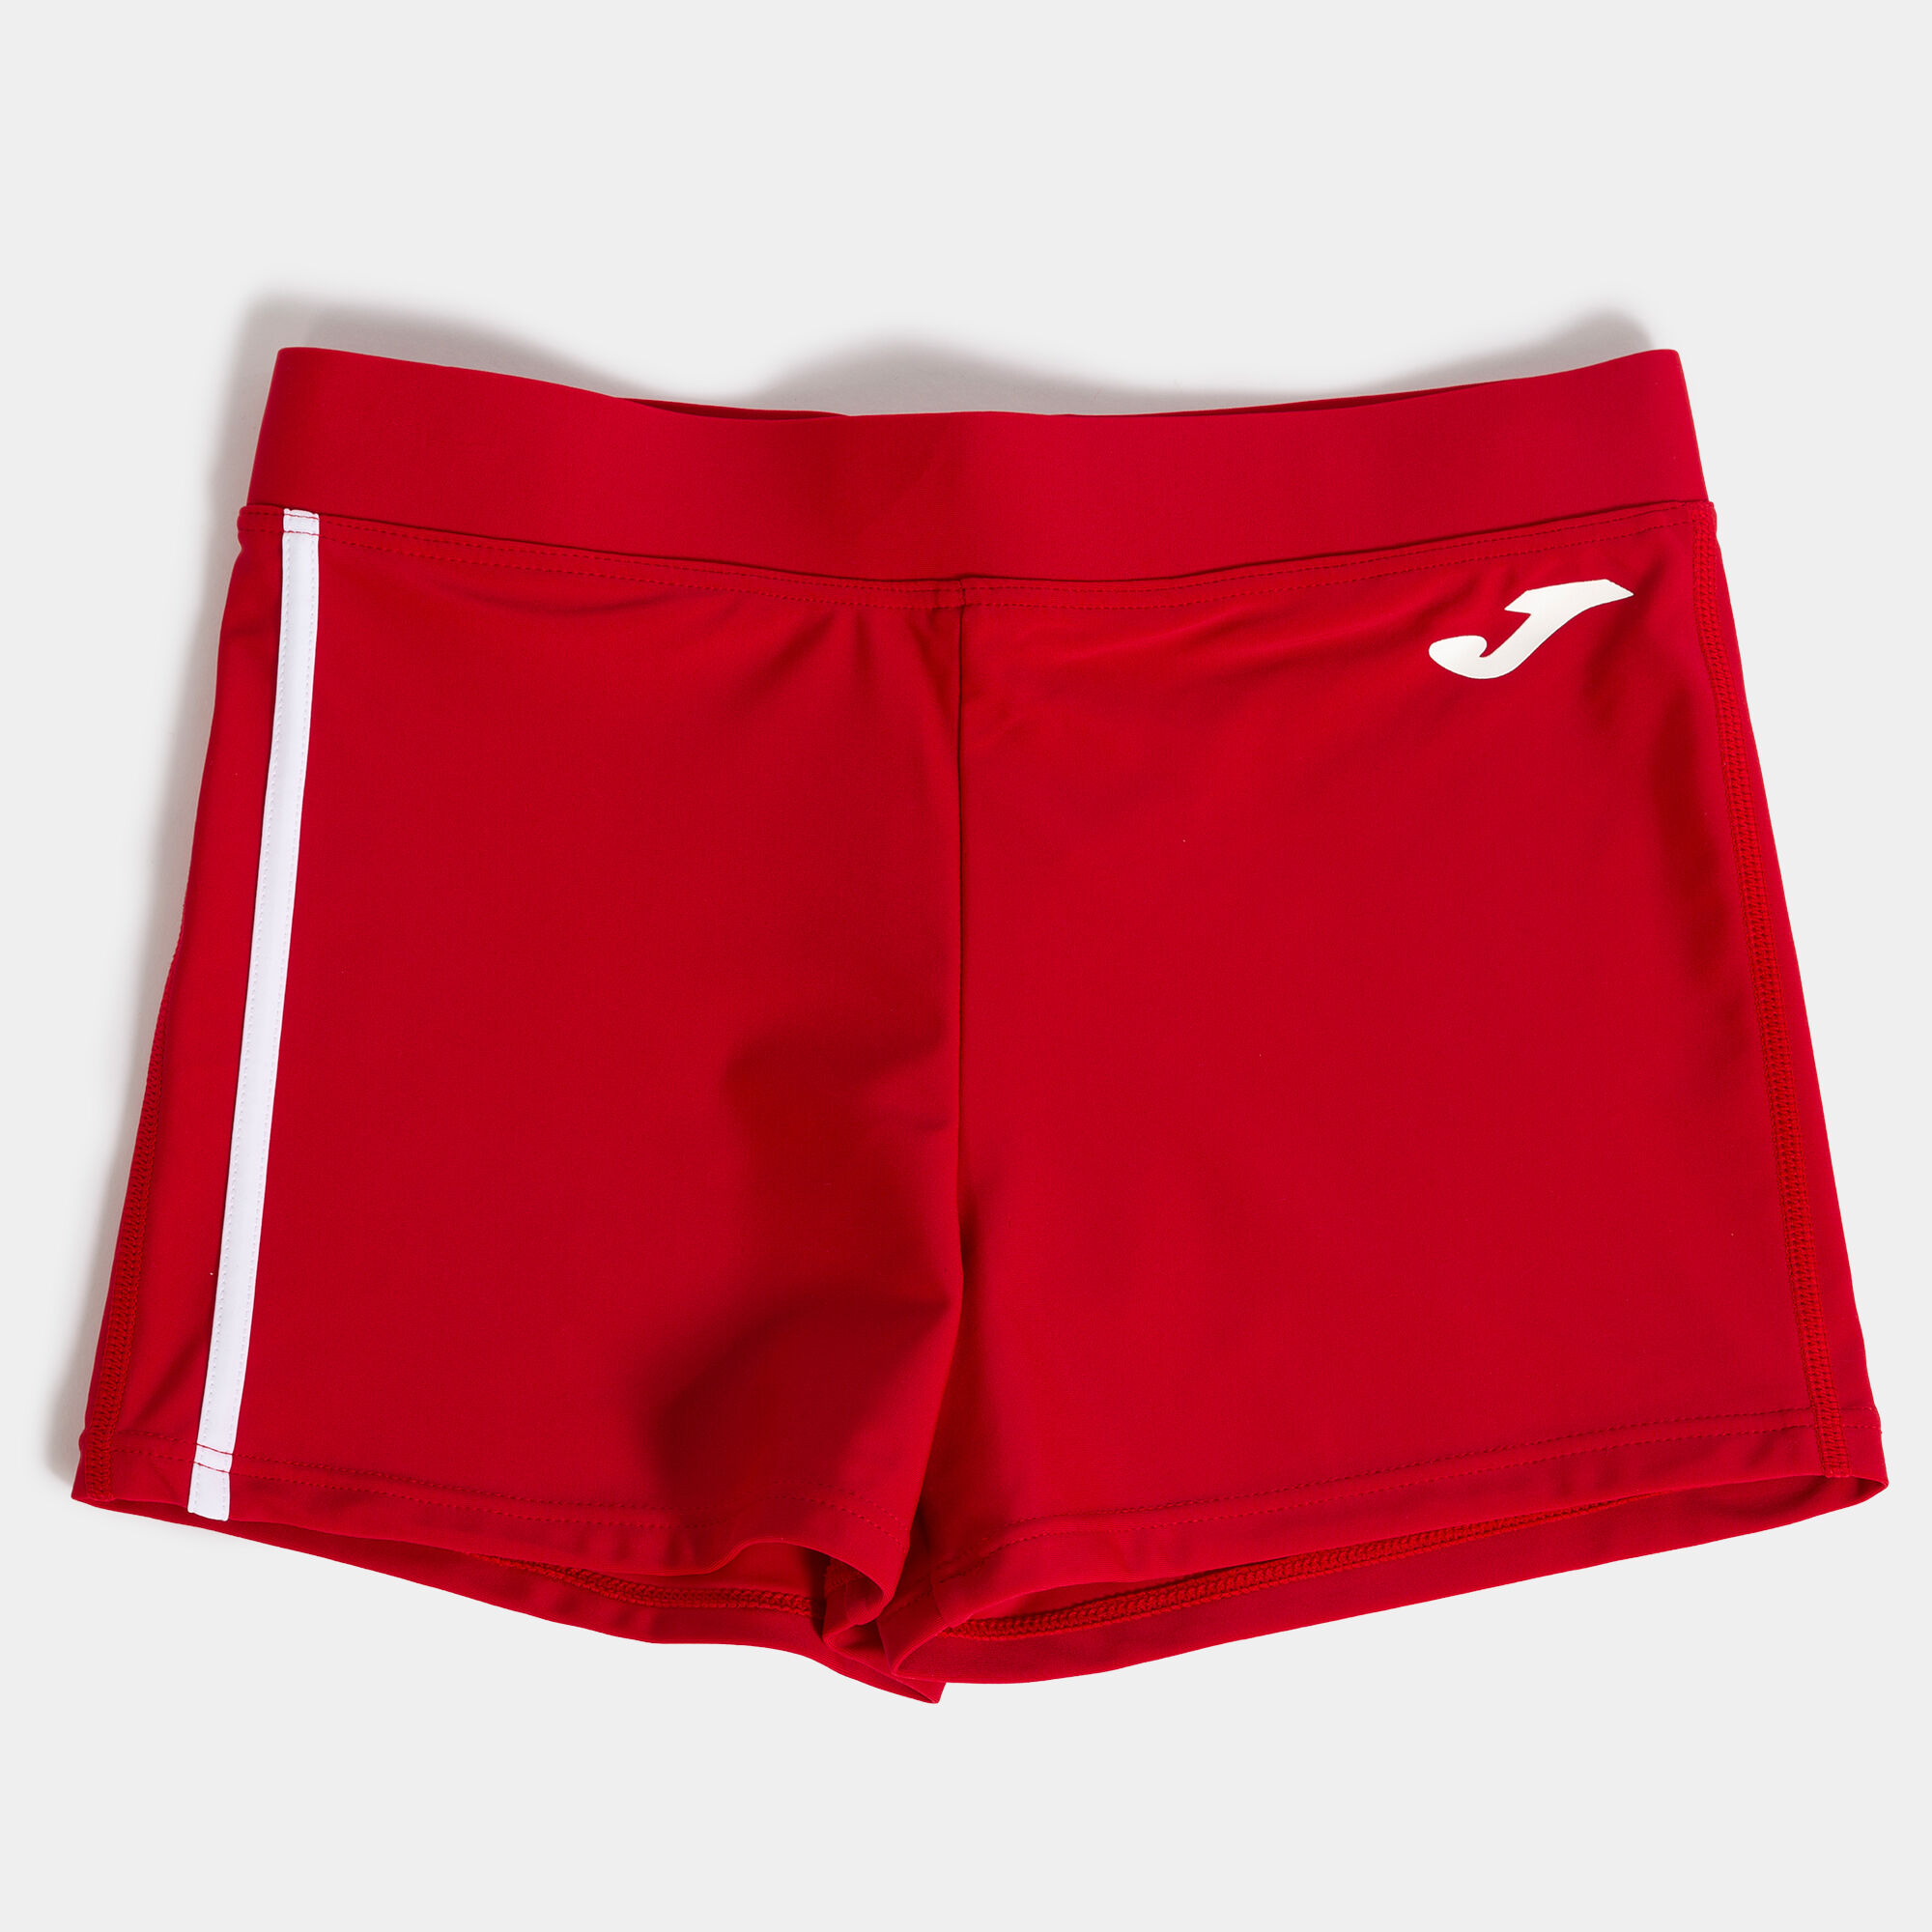 Maillot boxer homme Shark rouge blanc